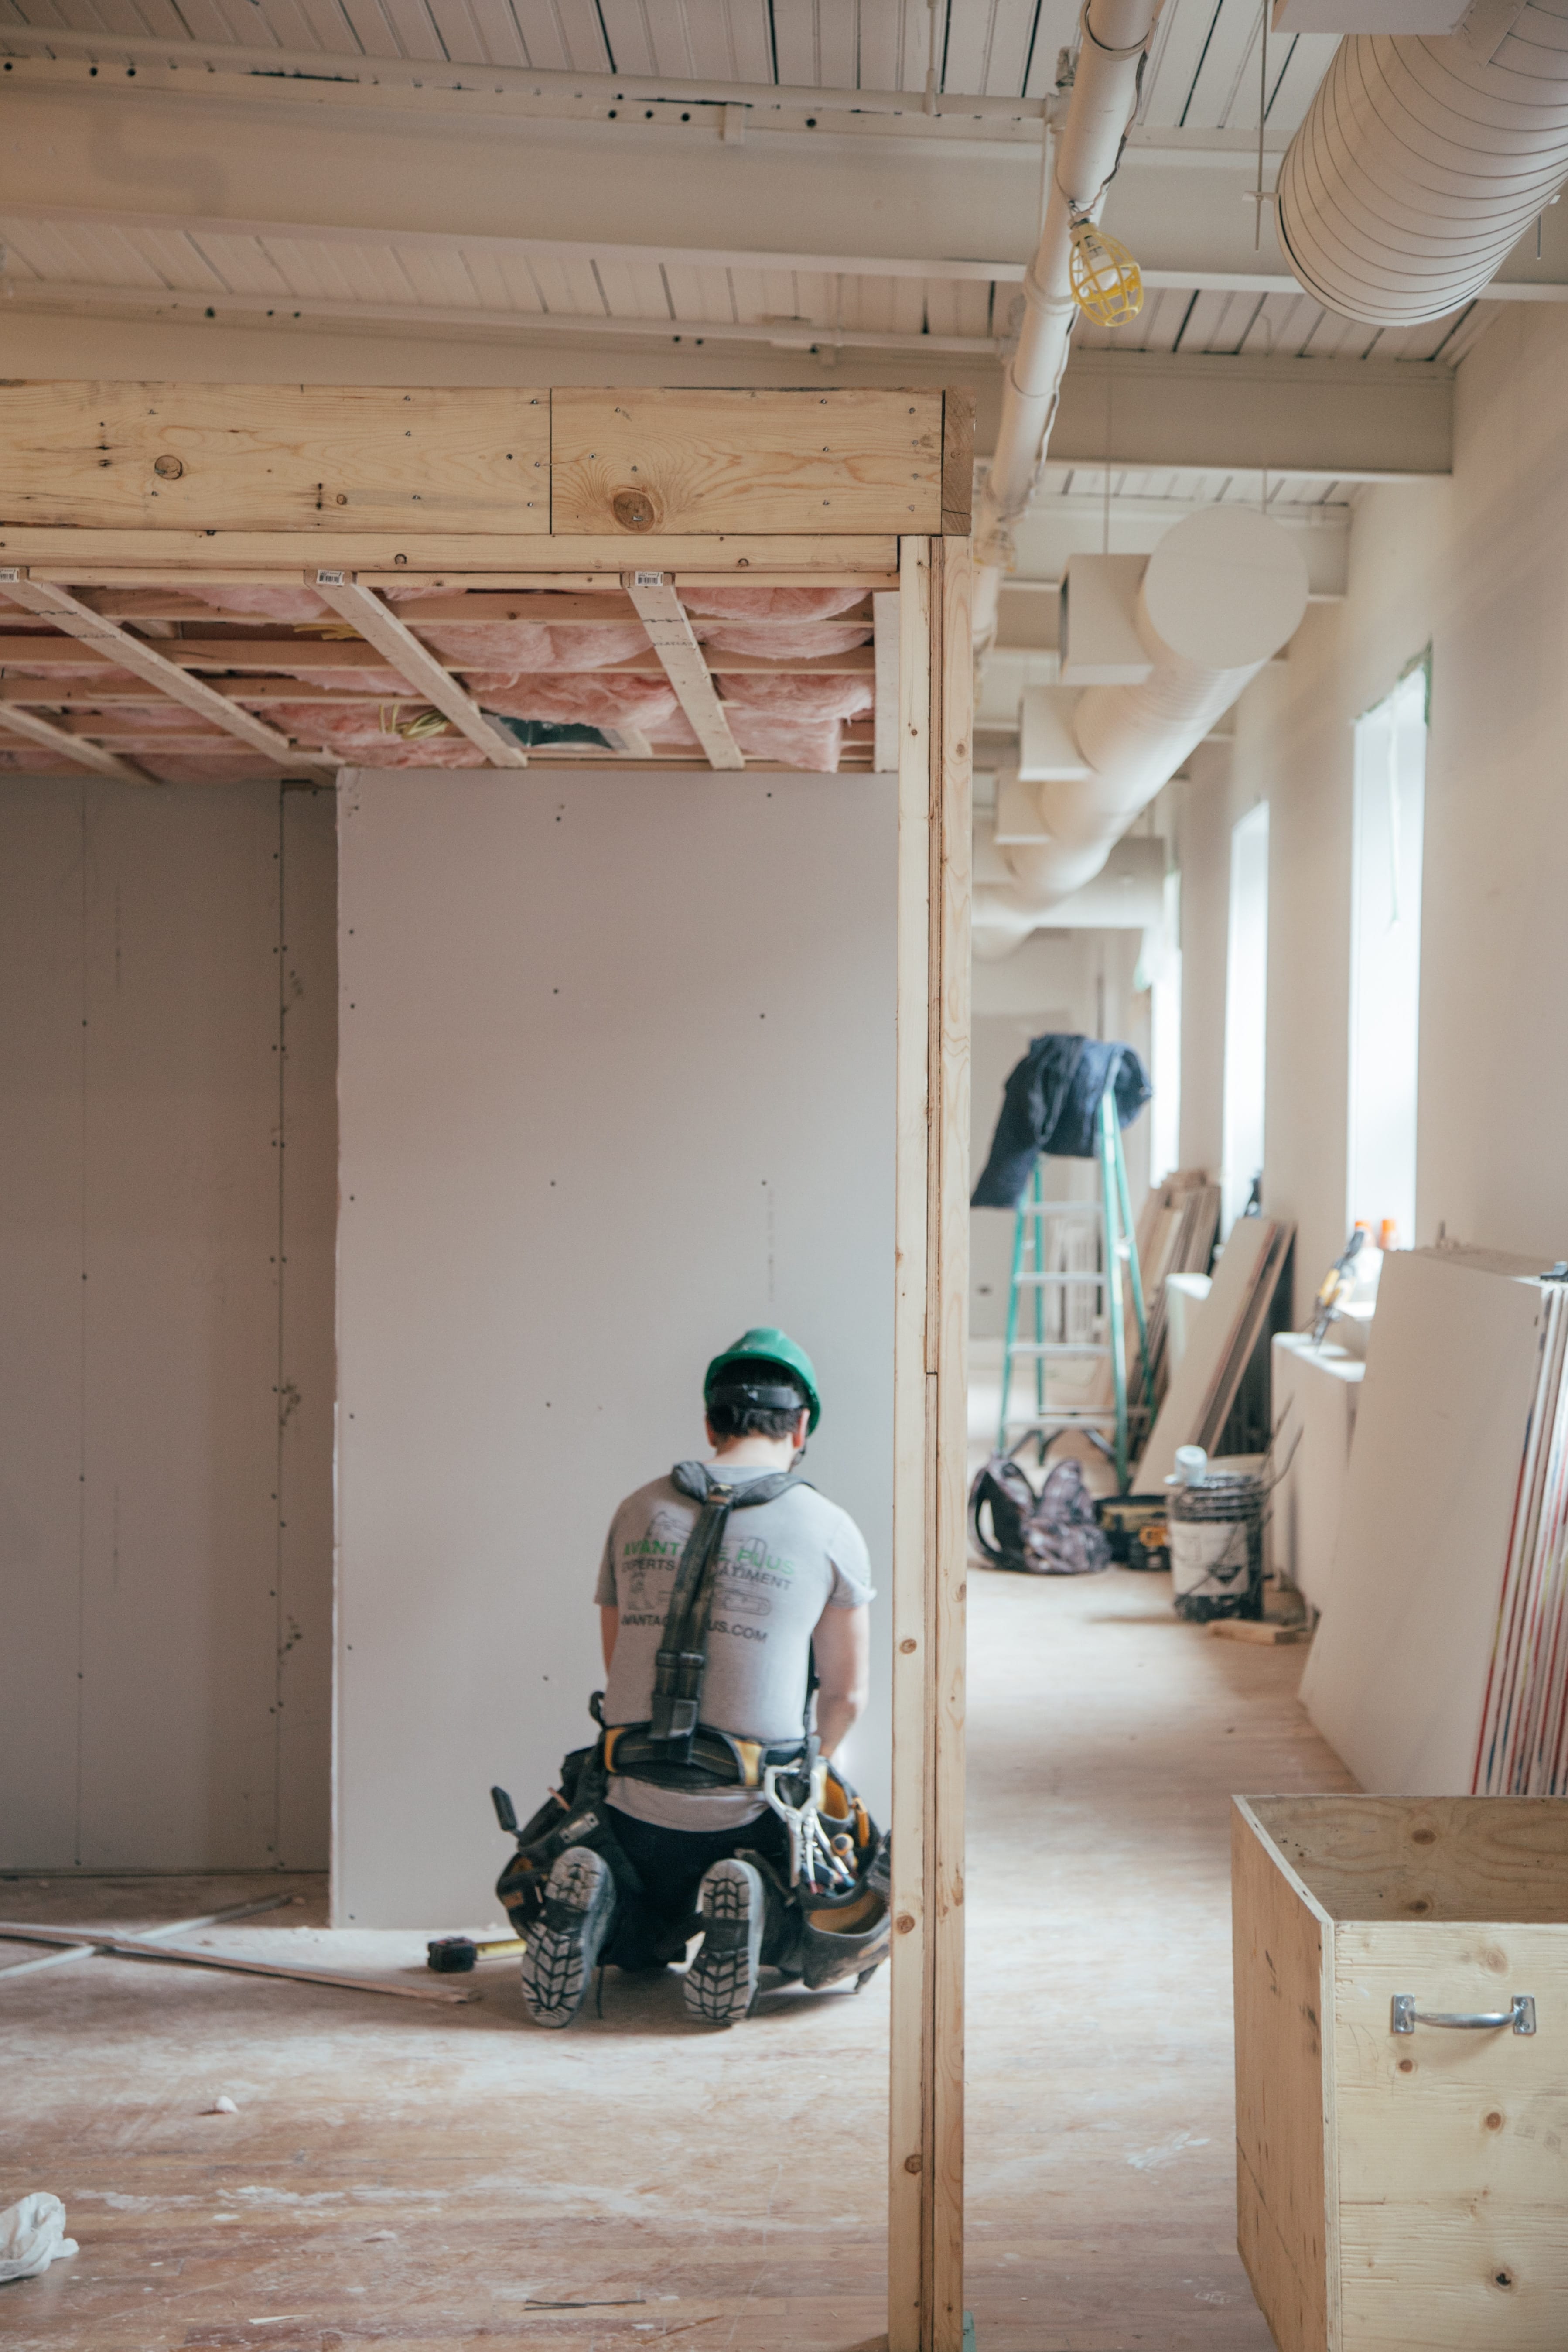 Construction worker kneeling in front of a wall; image by Charles, via Unsplash.com.